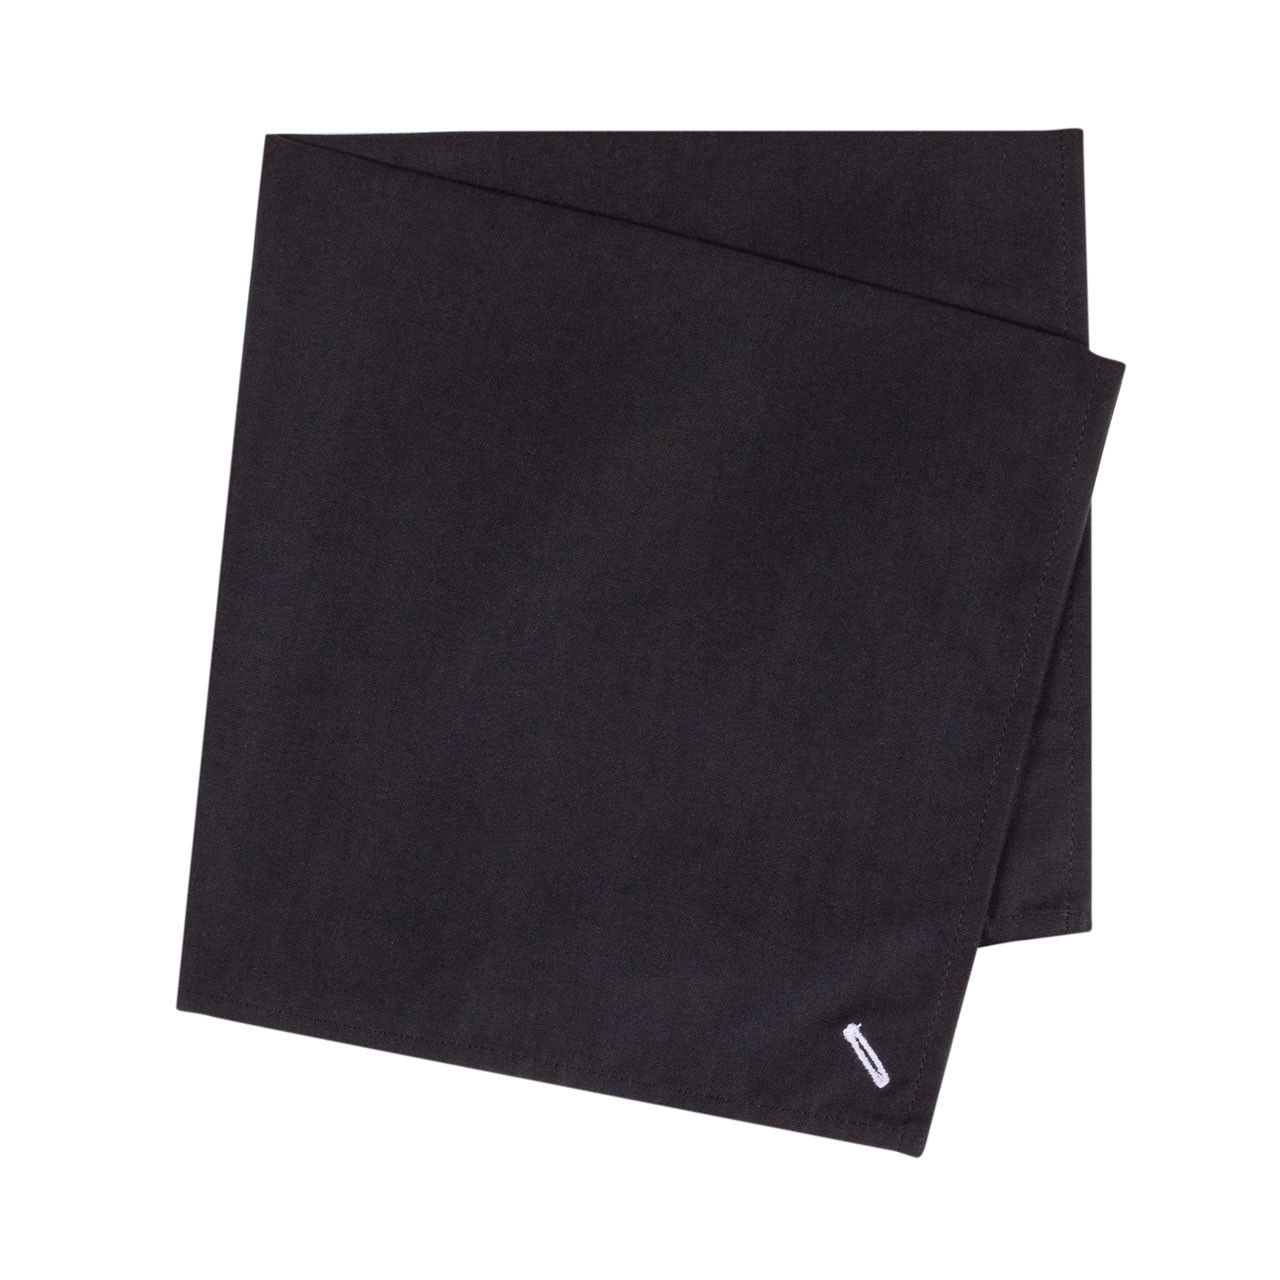 Are button hole napkins from Signature Plus elegant, durable, and valuable?